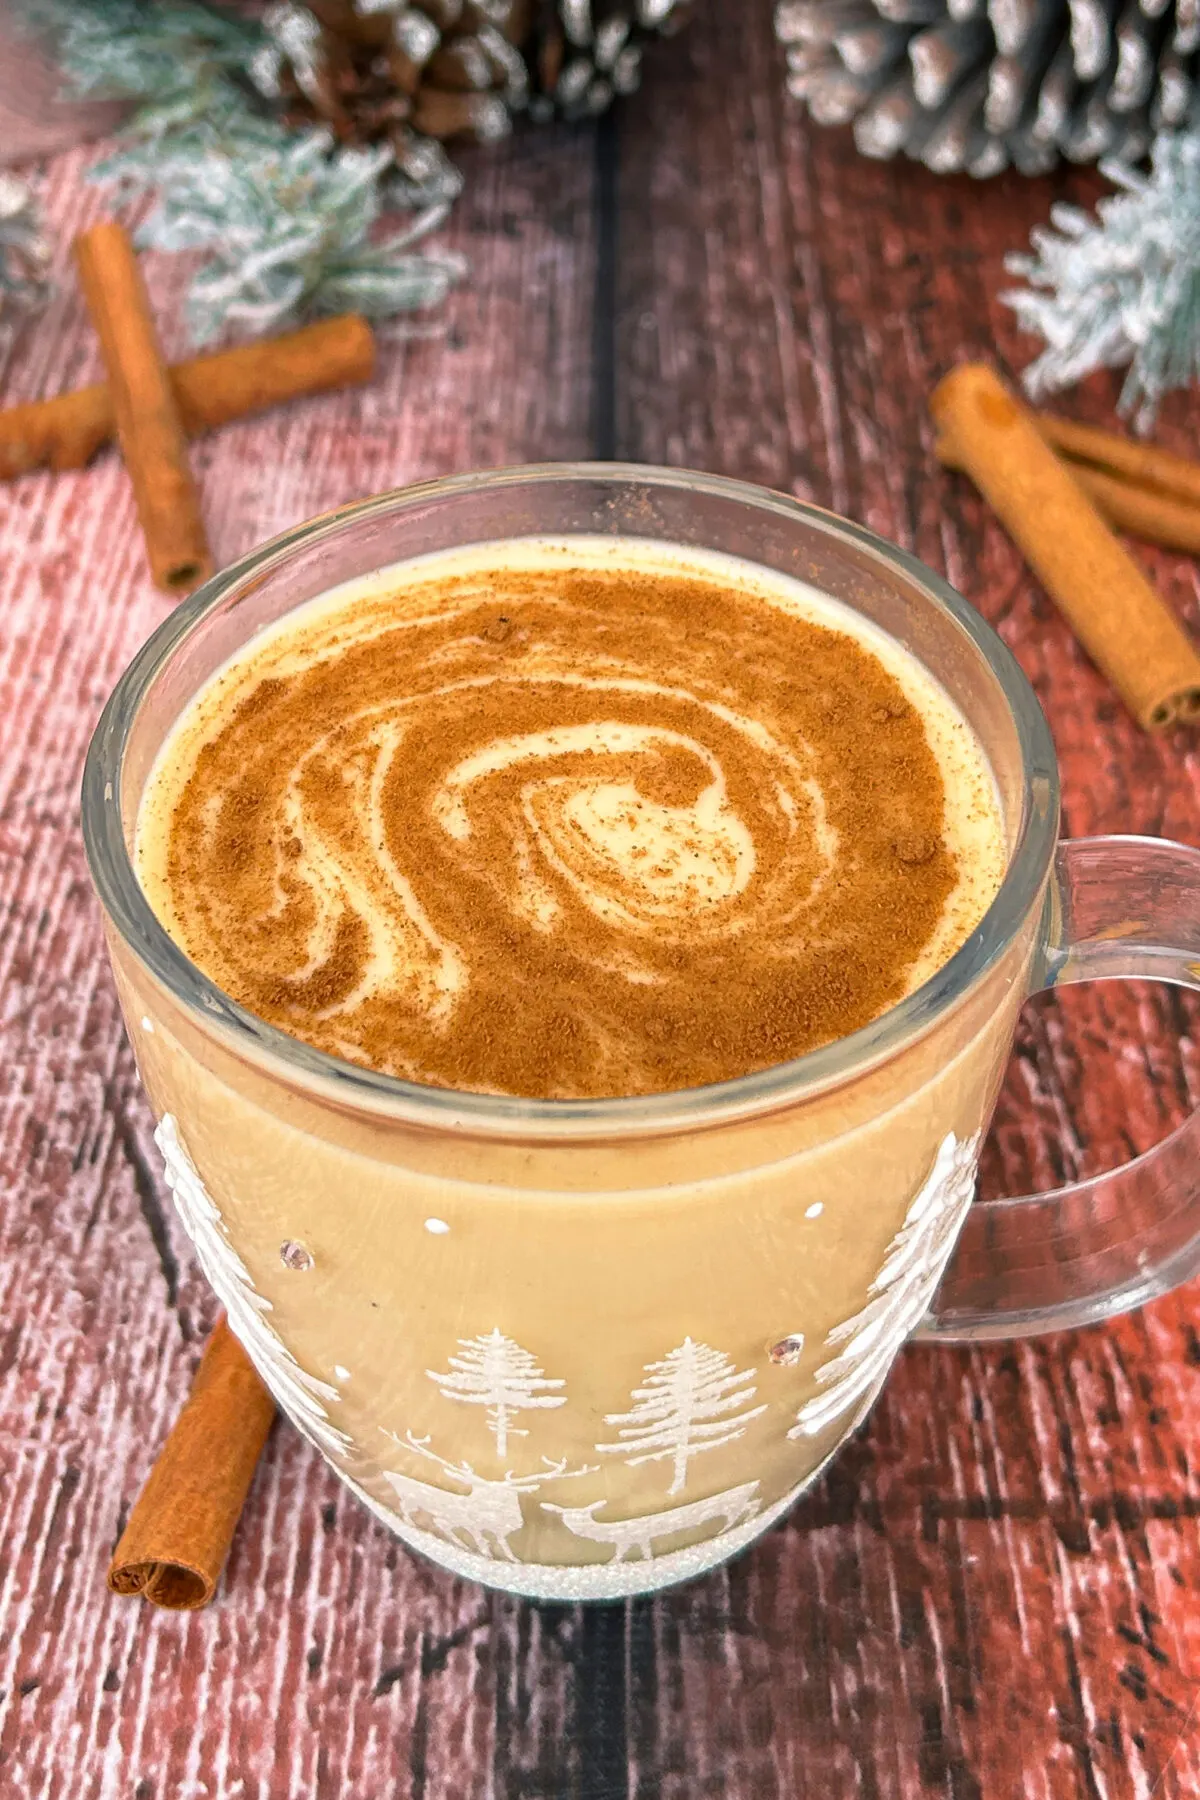 Impress with this festive twist on classic eggnog – perfect for the holiday season! Discover how to make our aromatic dirty chai eggnog today.